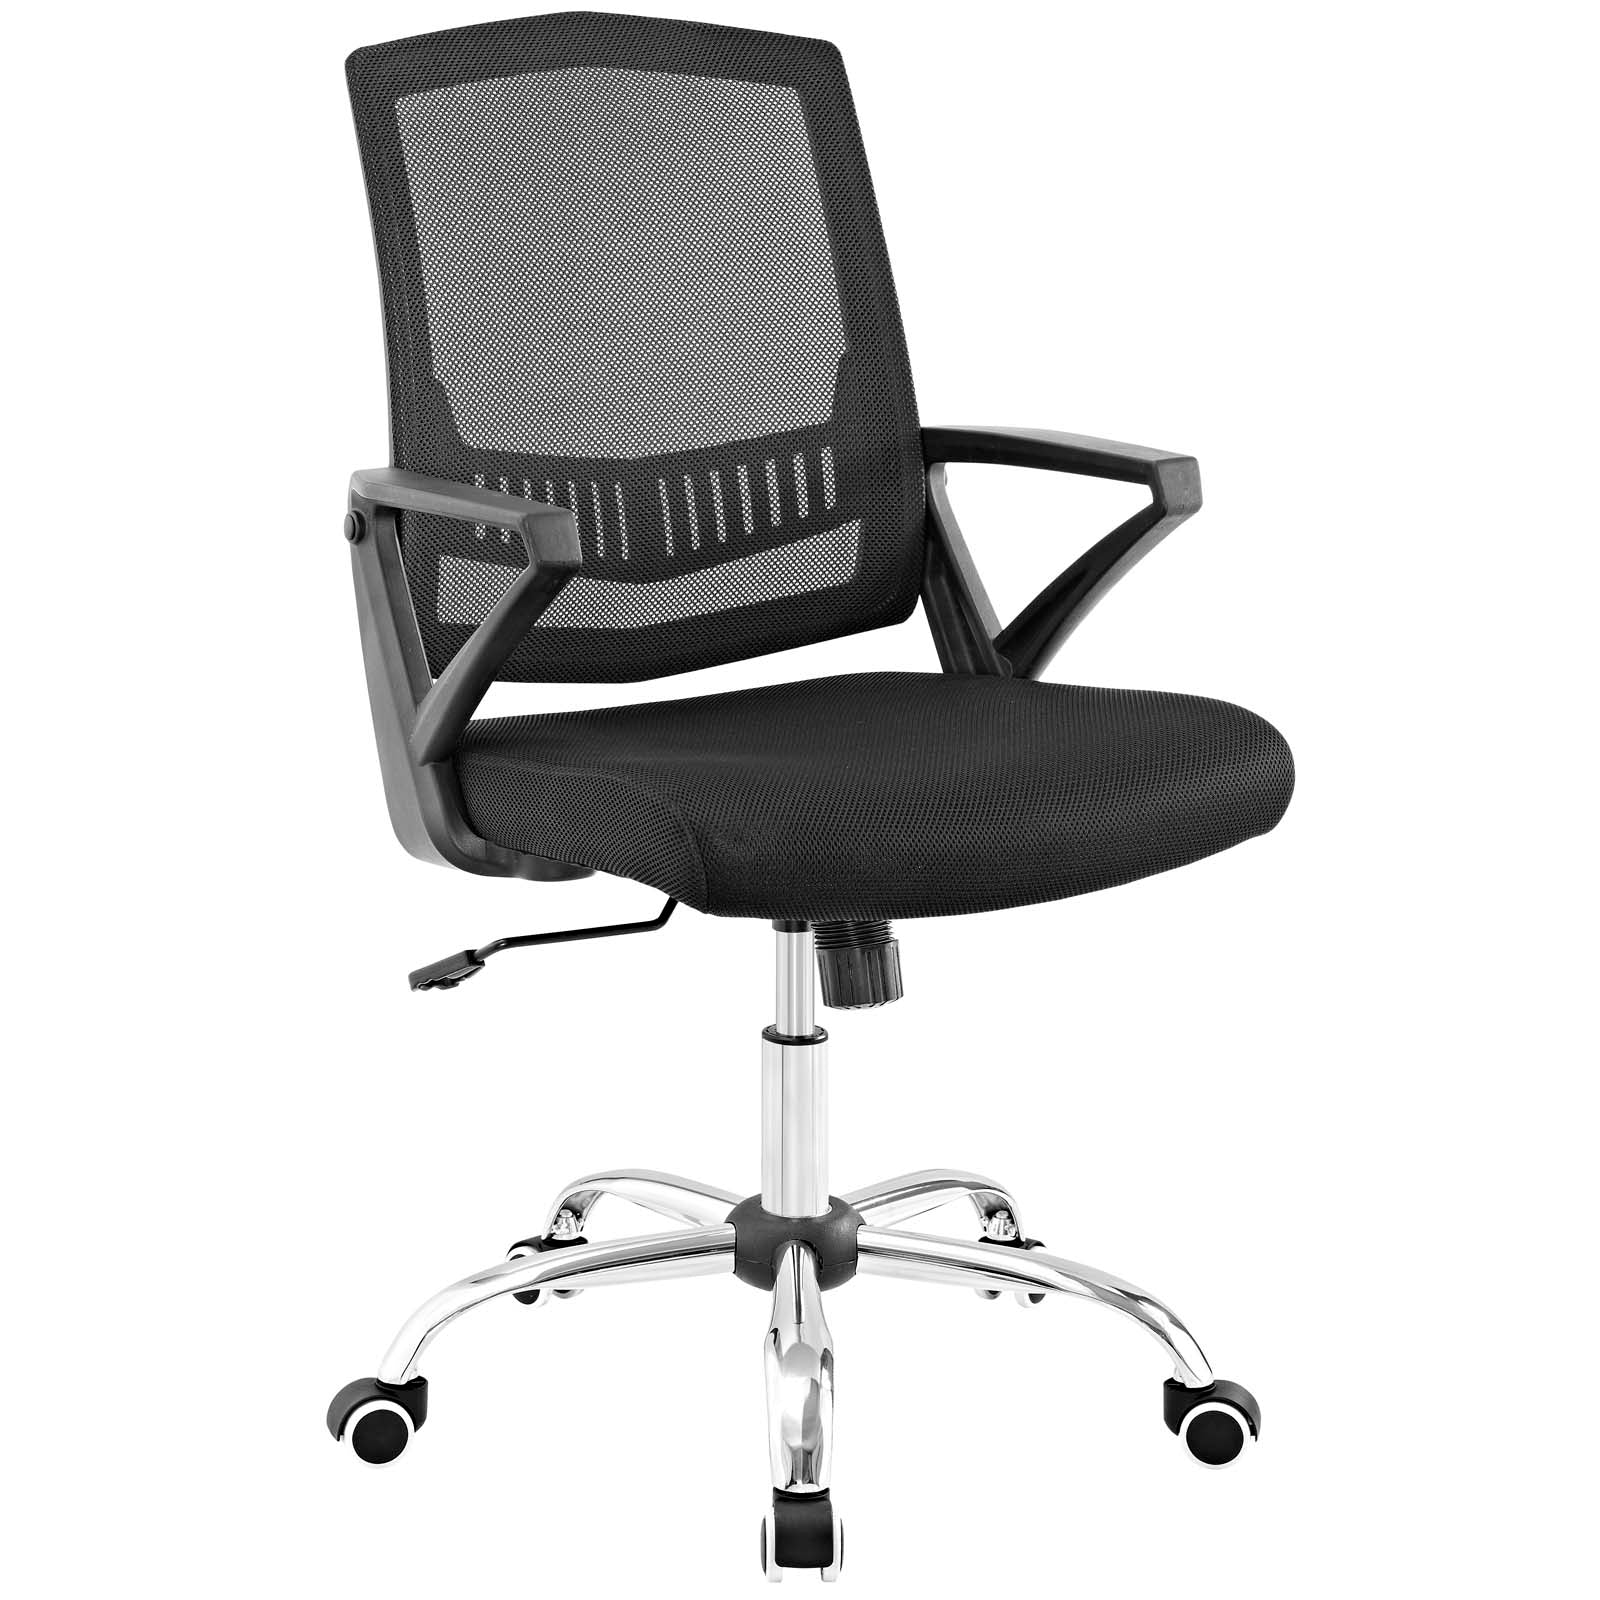 Shop Proceed Mid Back Upholstered Fabric Office Chair at BUILDMyplace